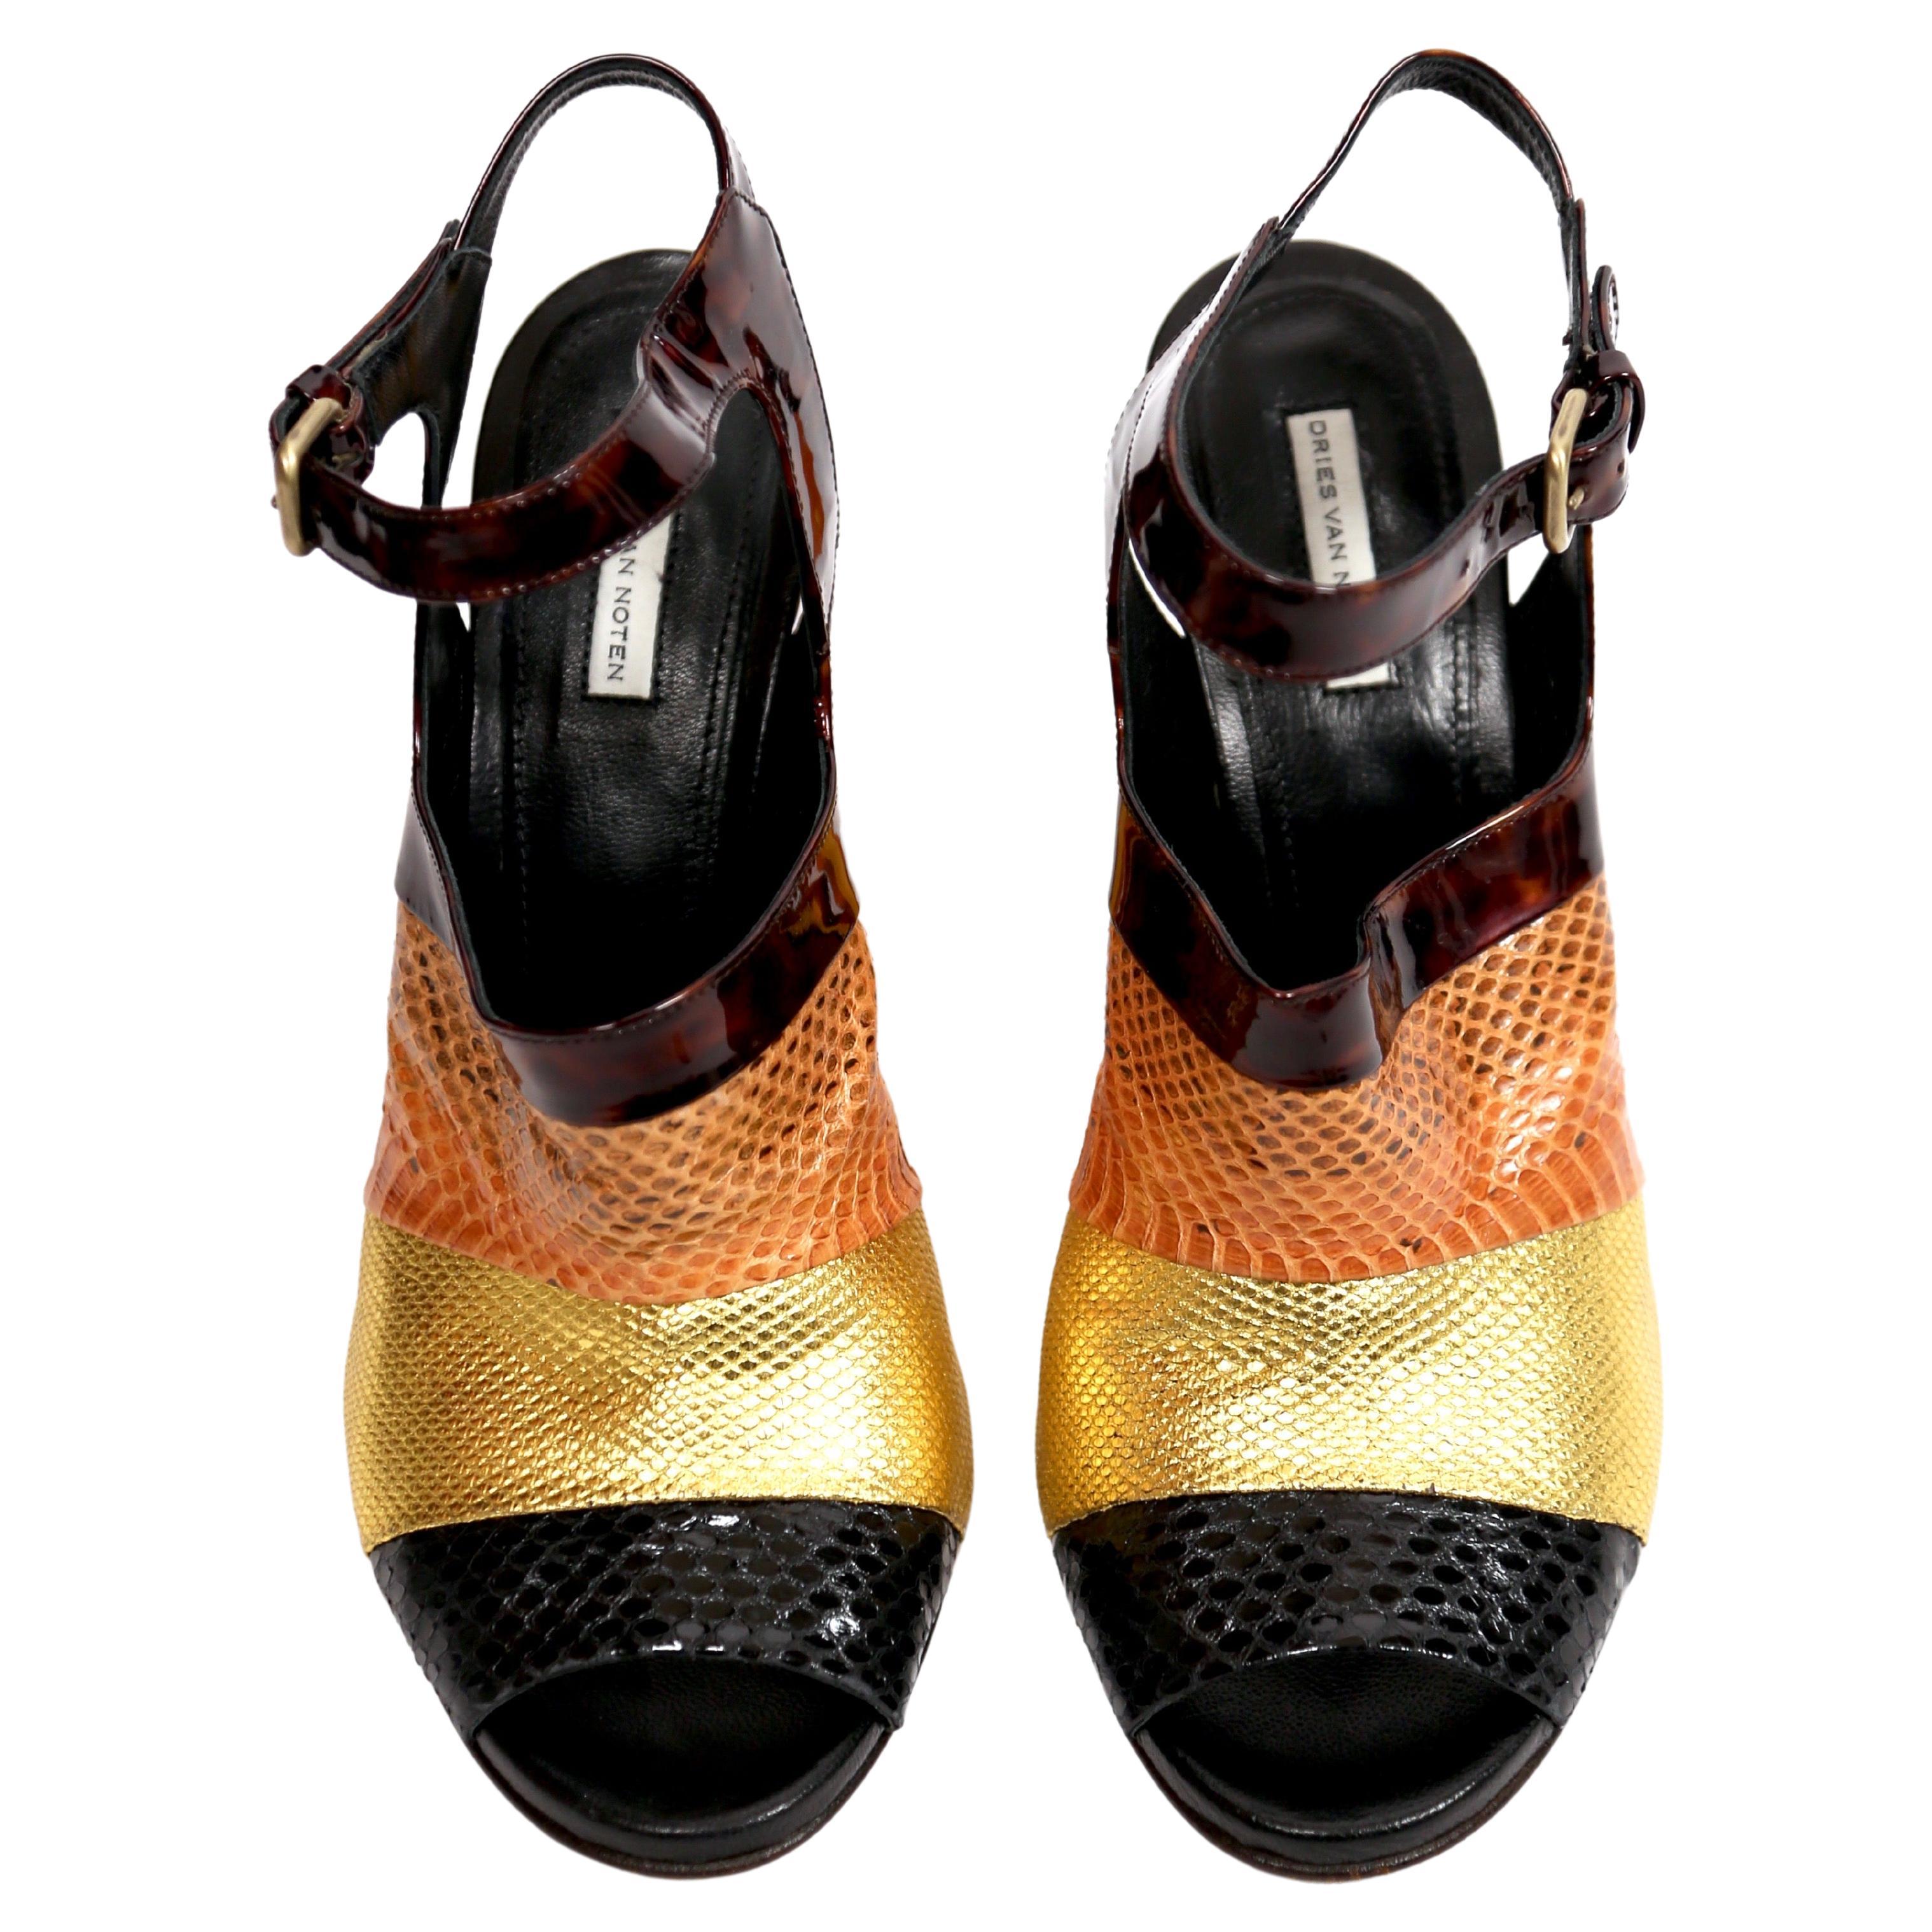 DRIES VAN NOTEN reptile leather shoes with lucite heels - 41 In Good Condition For Sale In San Fransisco, CA